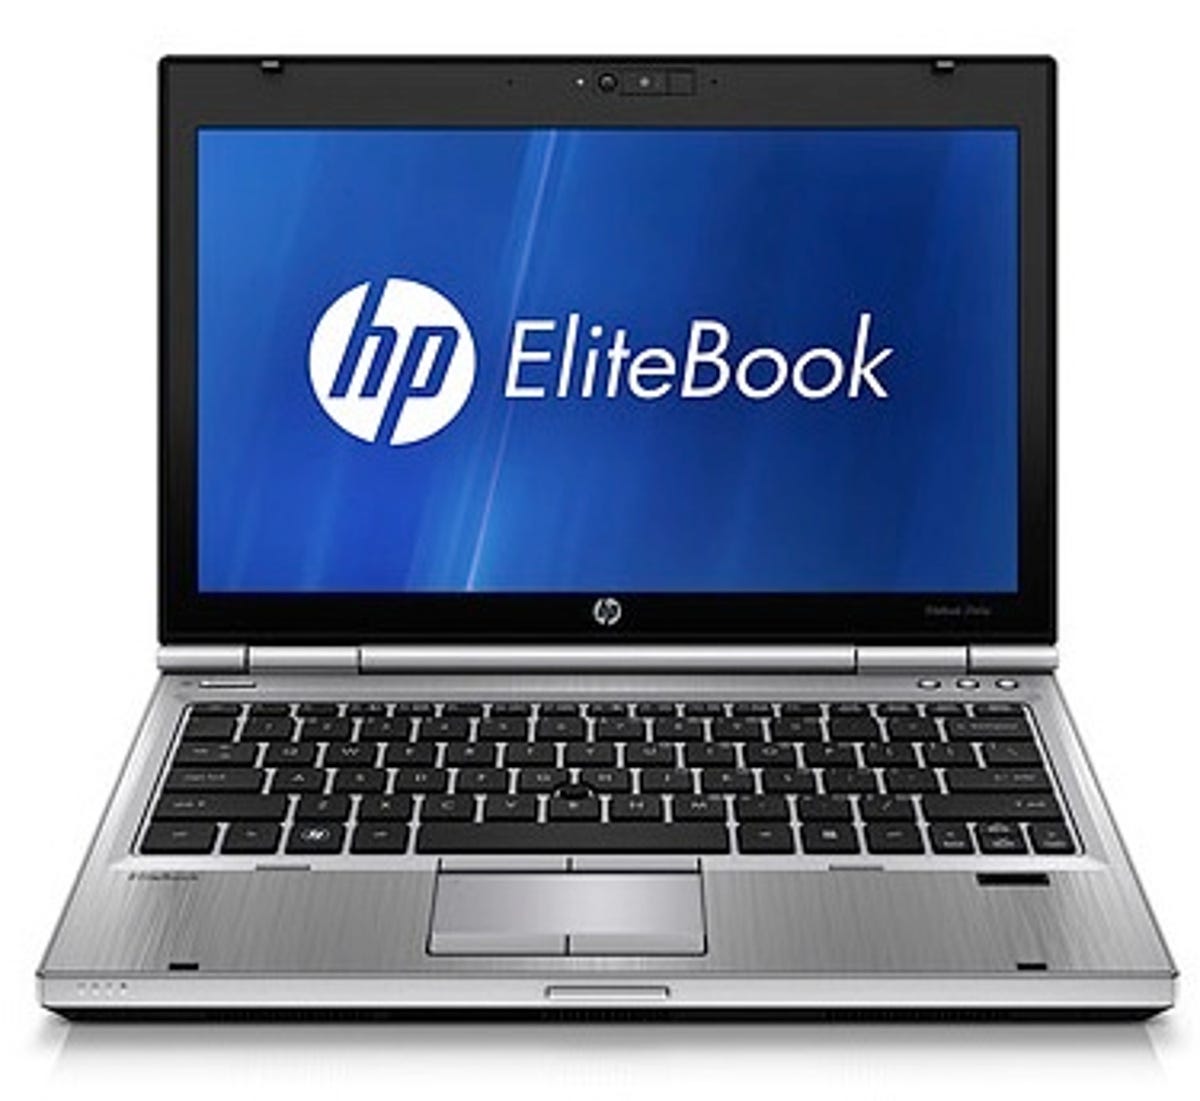 HP is the largest PC vendor in the world and sells laptops like the EliteBook 2560p to Fortune 500 companies.